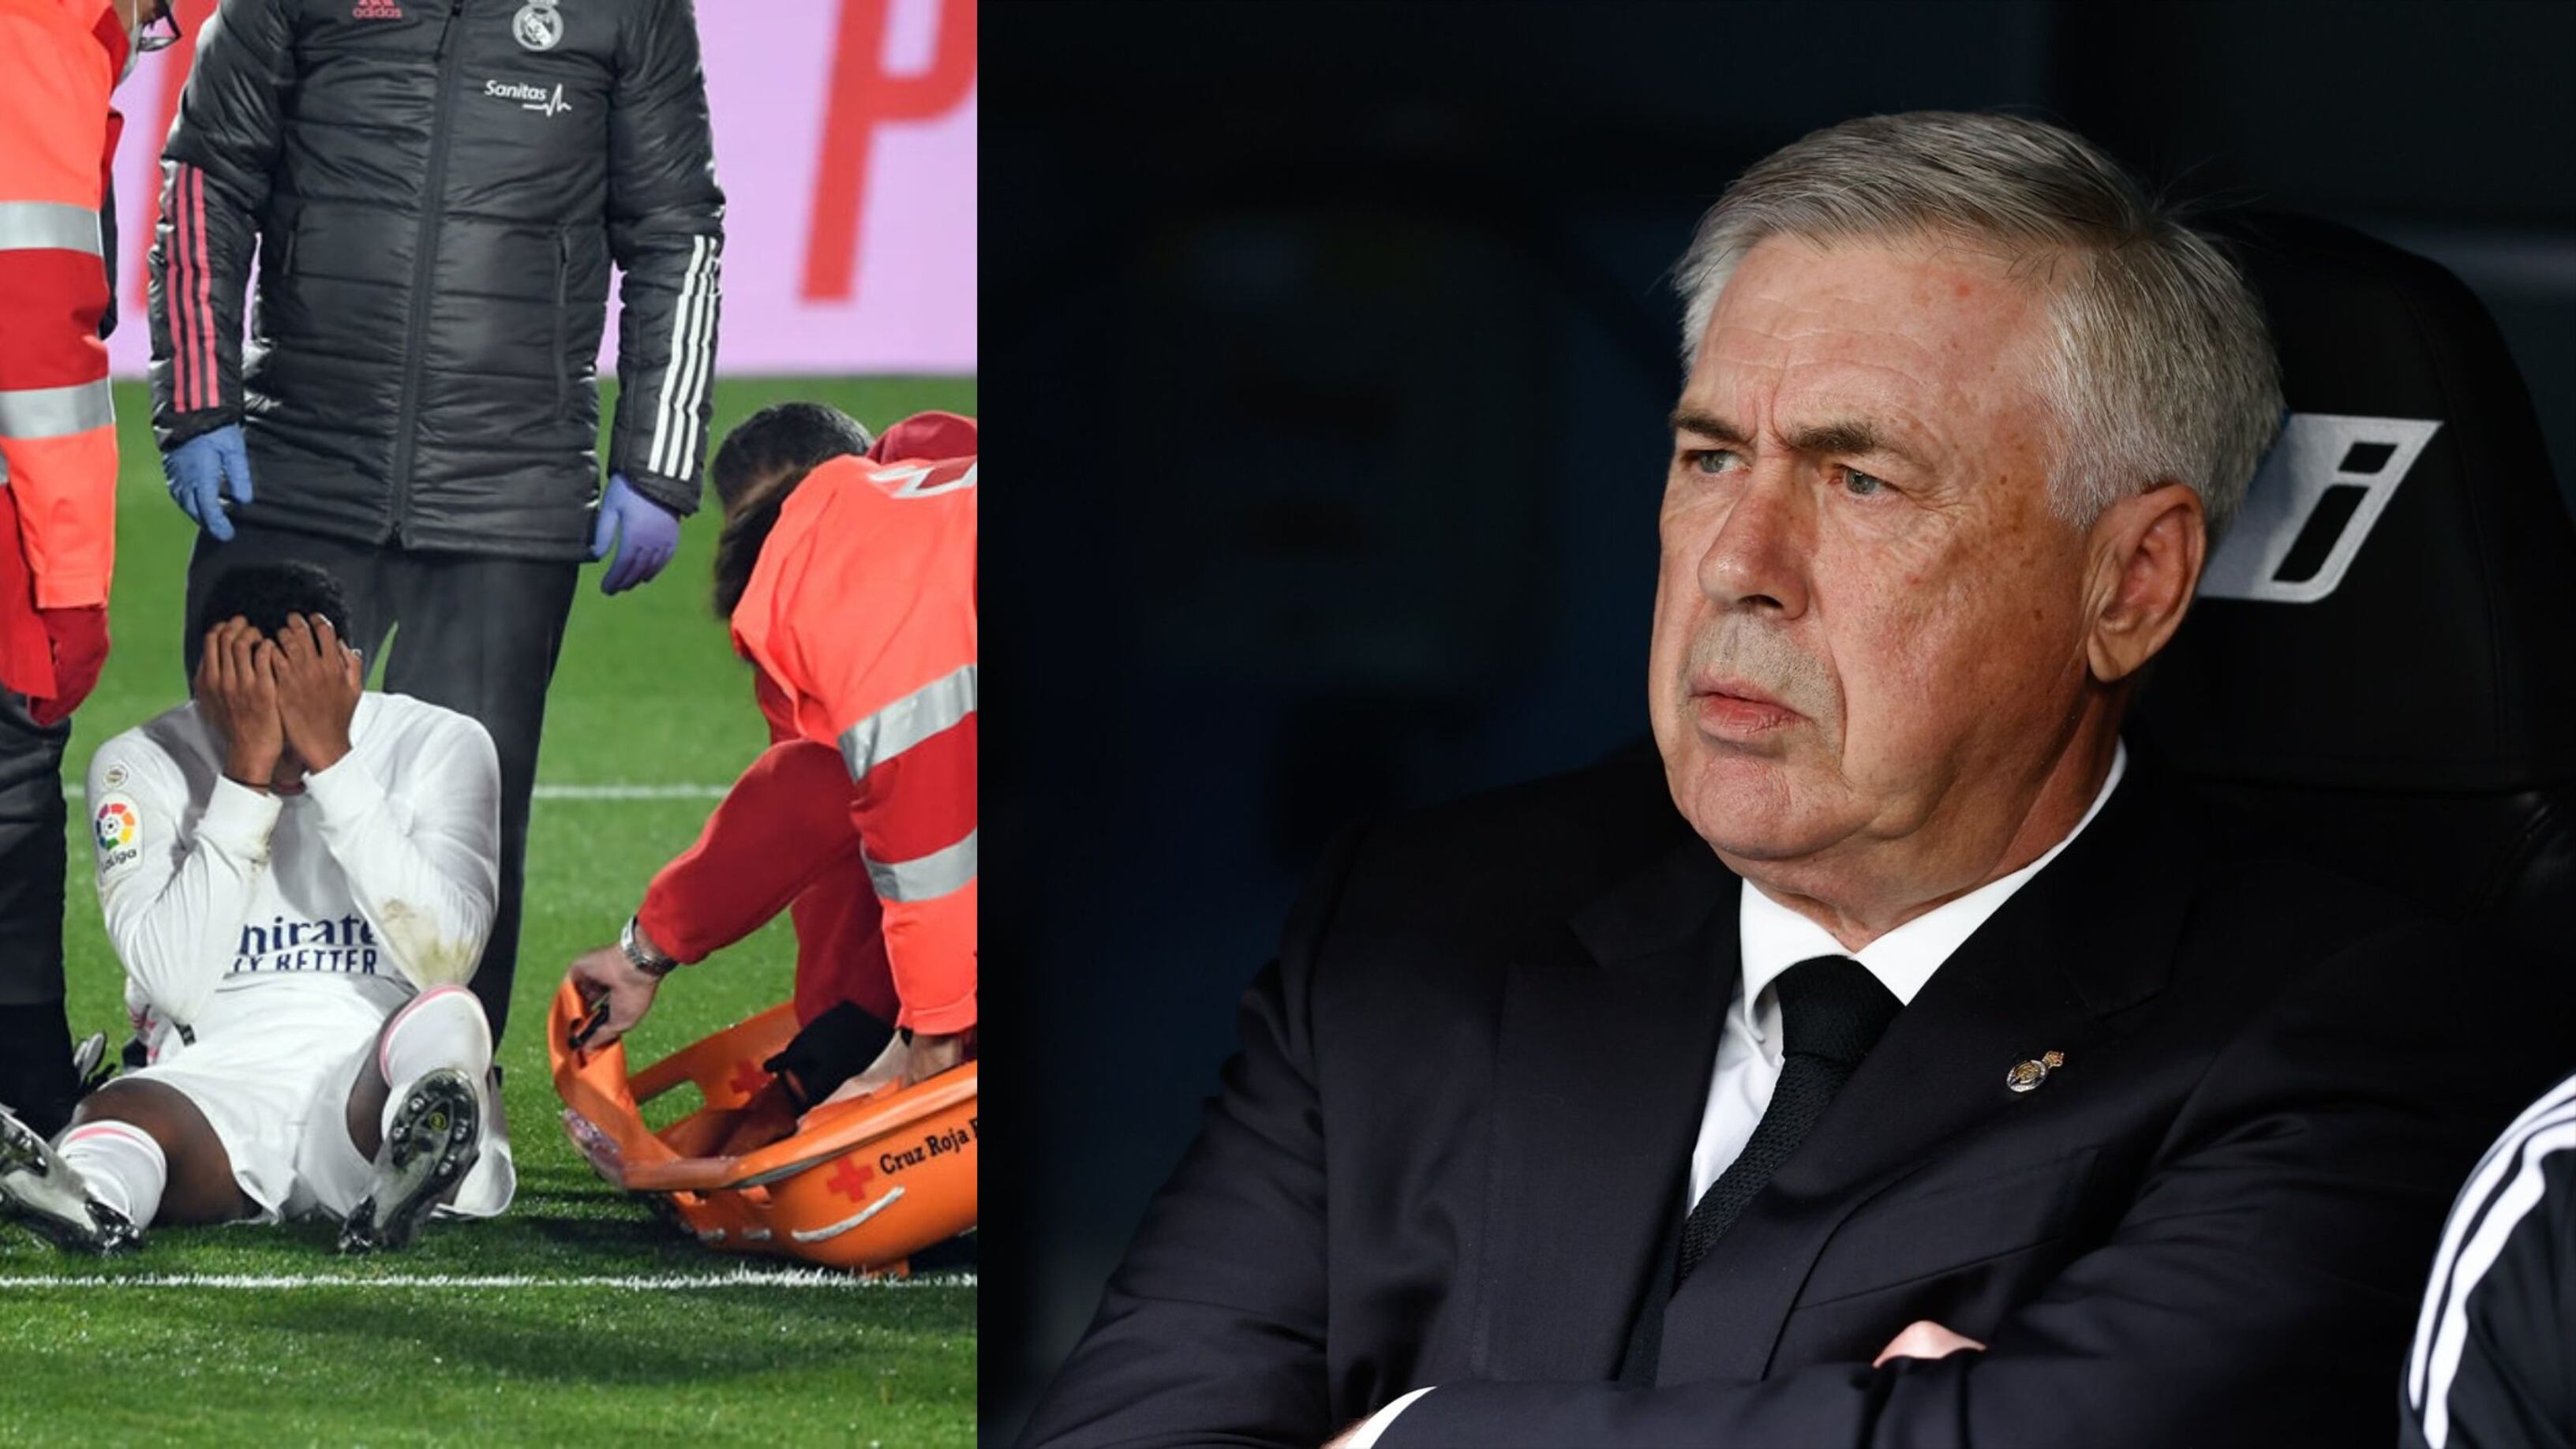 Neither Arda Guller nor Mendy, Real Madrid's new severe injury that paralyzes Ancelotti